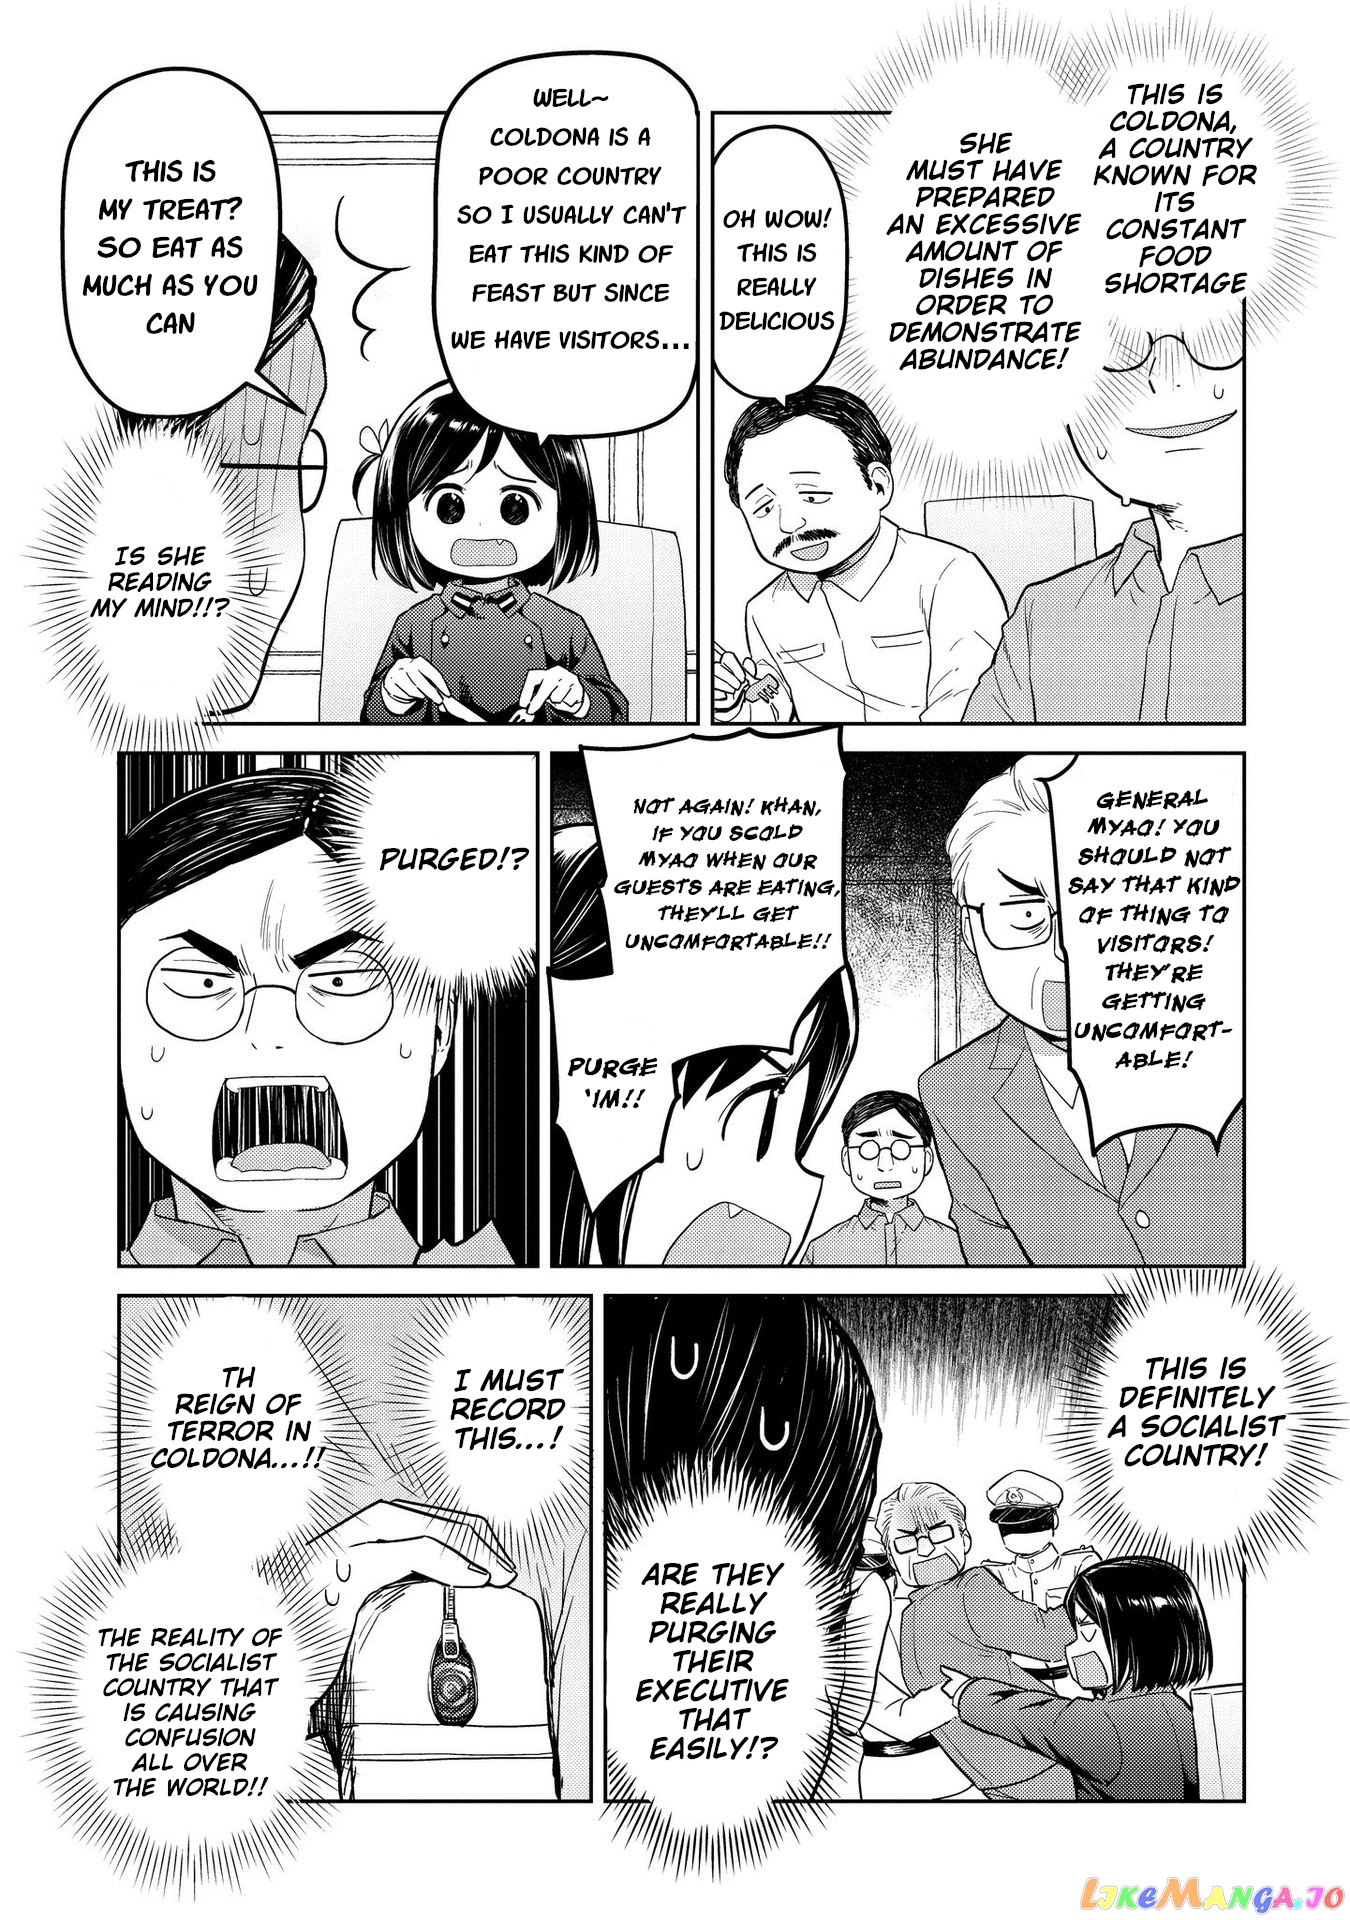 Oh, Our General Myao. chapter 18 - page 7